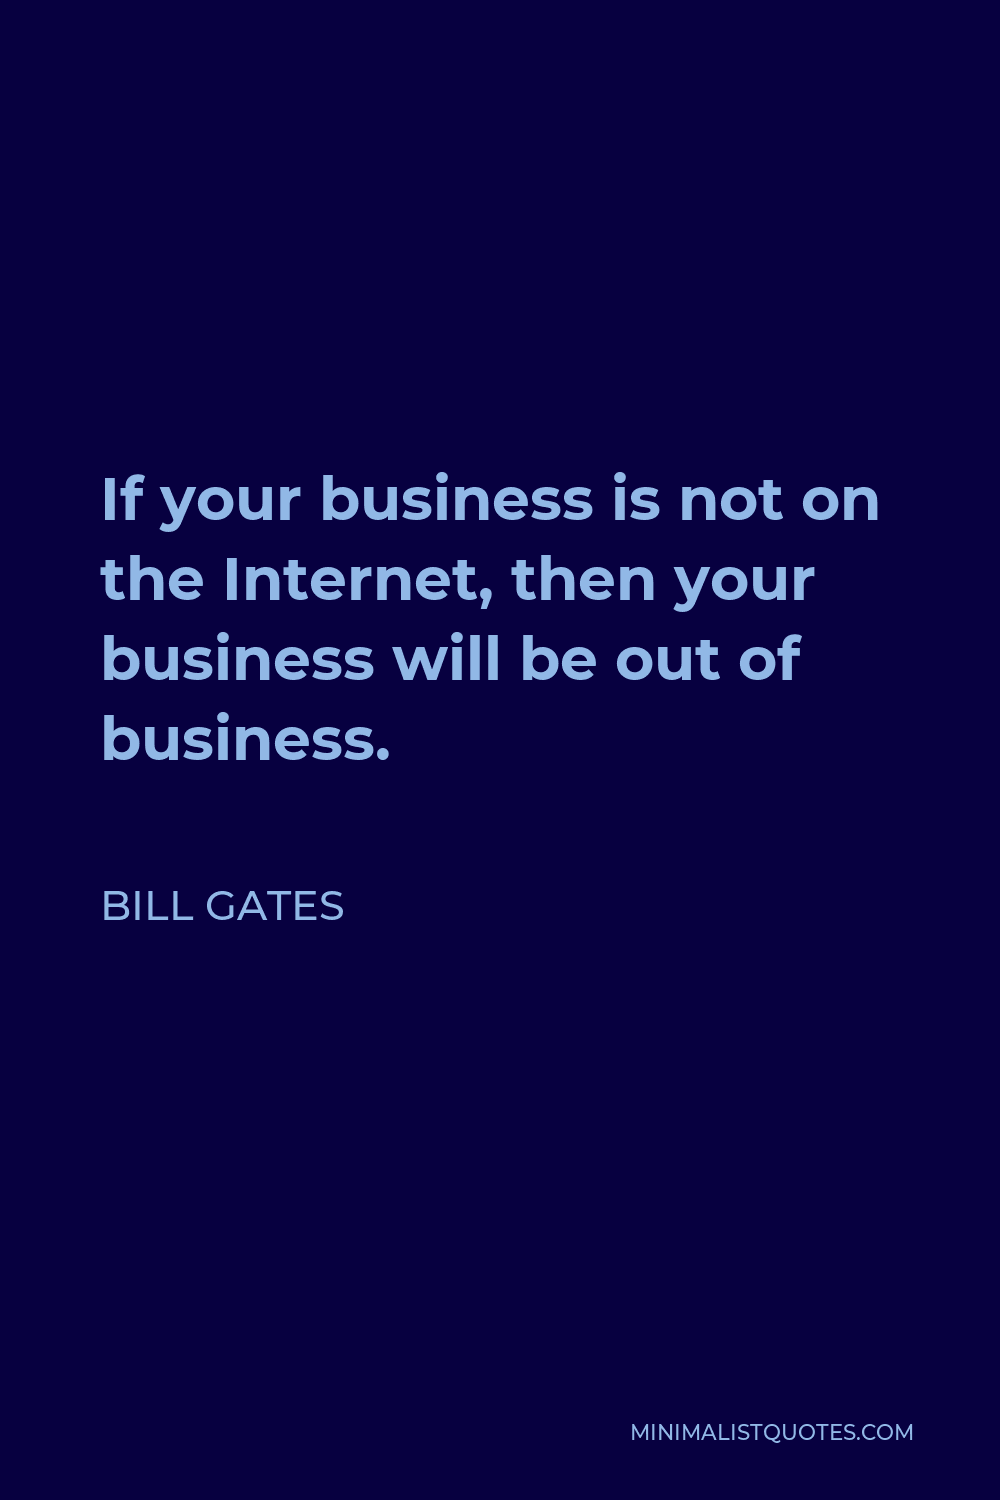 Bill Gates Quote - If your business is not on the Internet, then your business will be out of business.